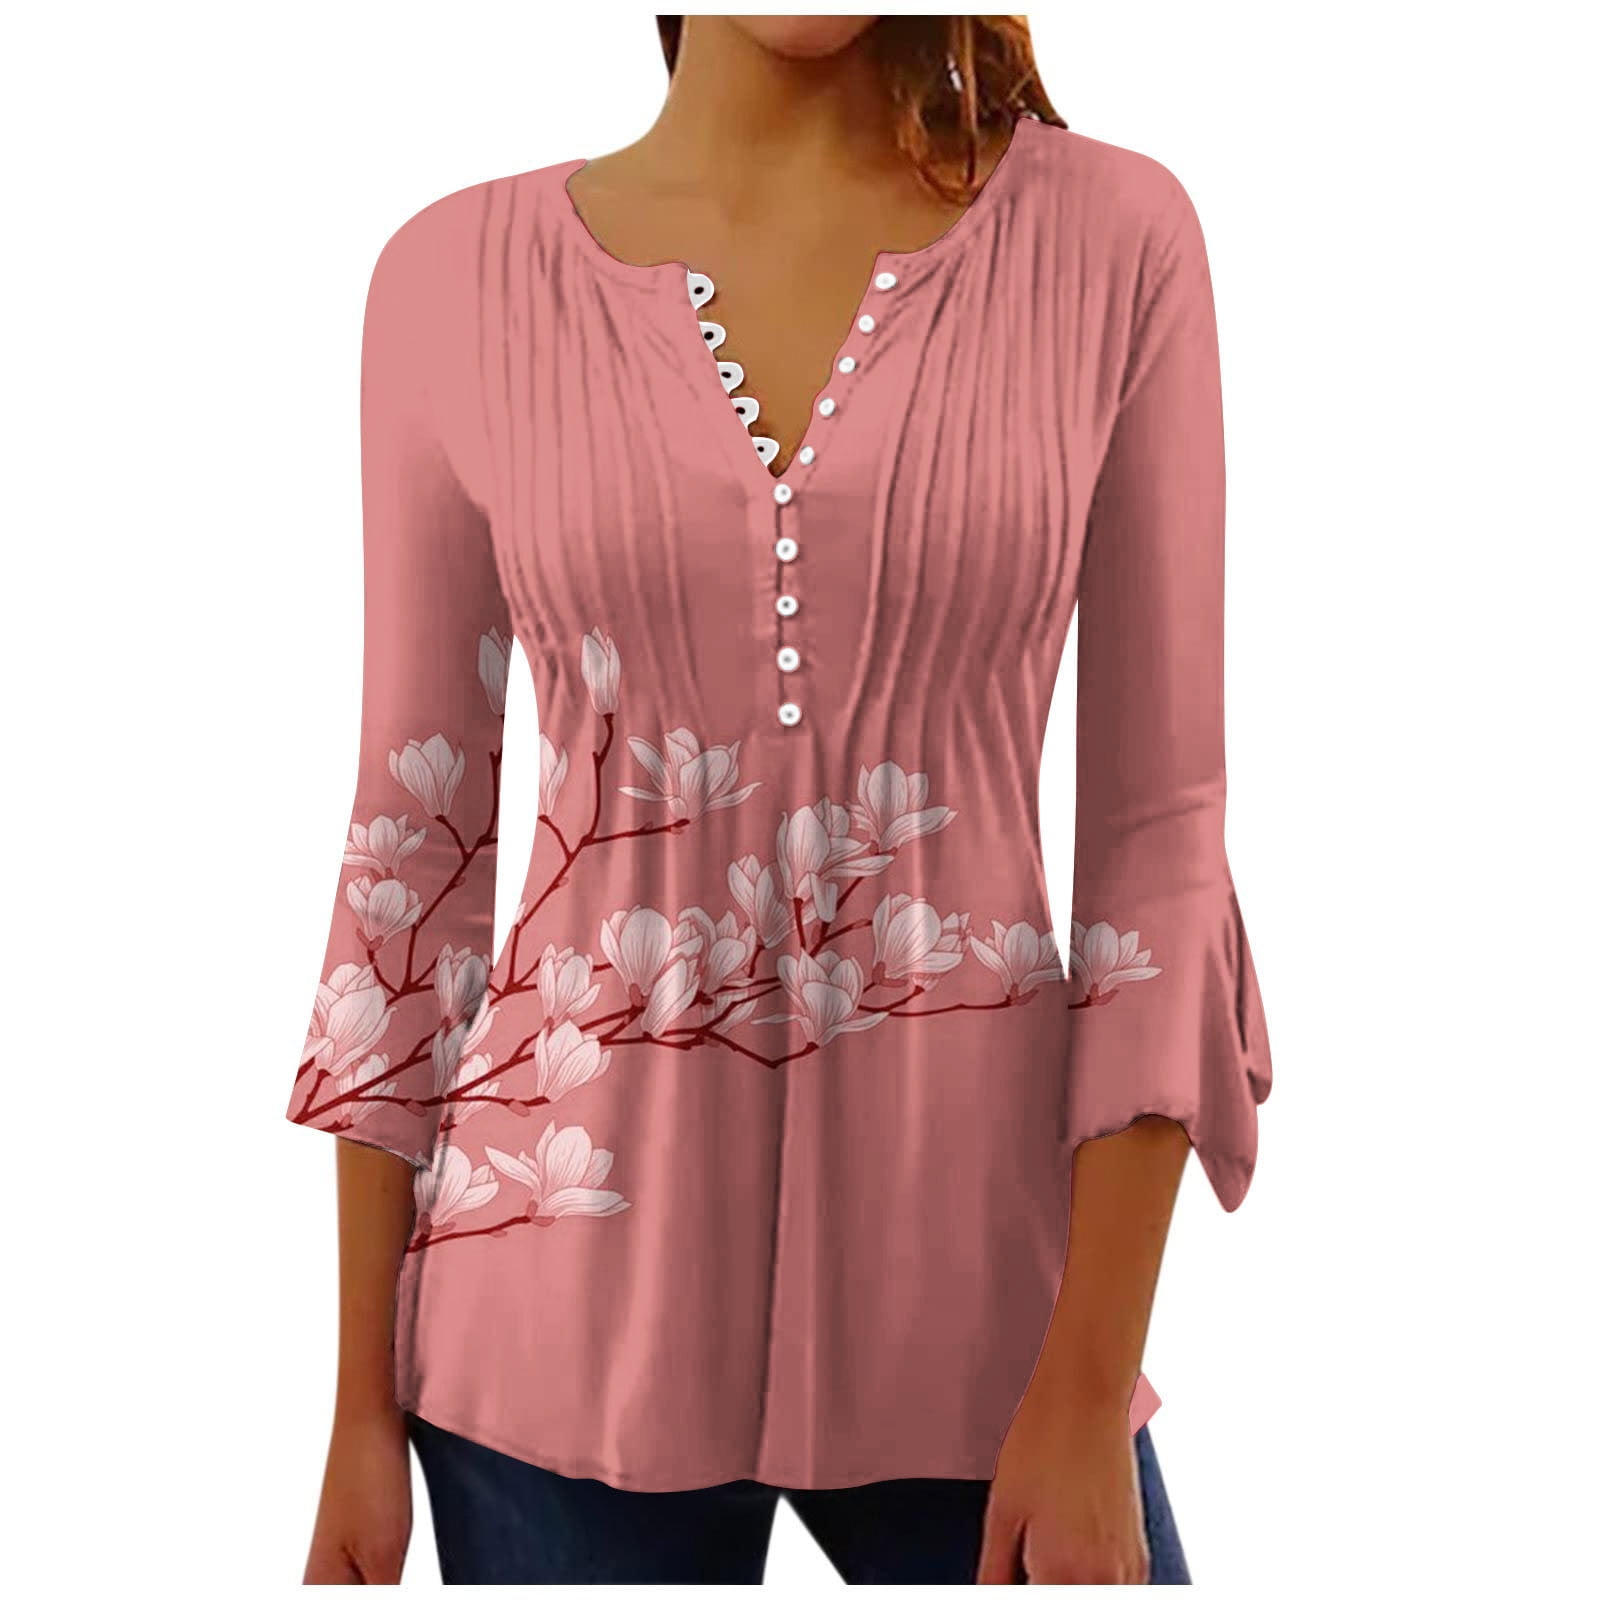 VSSSJ Blouses for Women Crew Floral Sleeve 3/4 Trumpet Button Casual Neck Pullover Shirts Pink Tops Ruched Tunic Printed L Daily Up Comfy